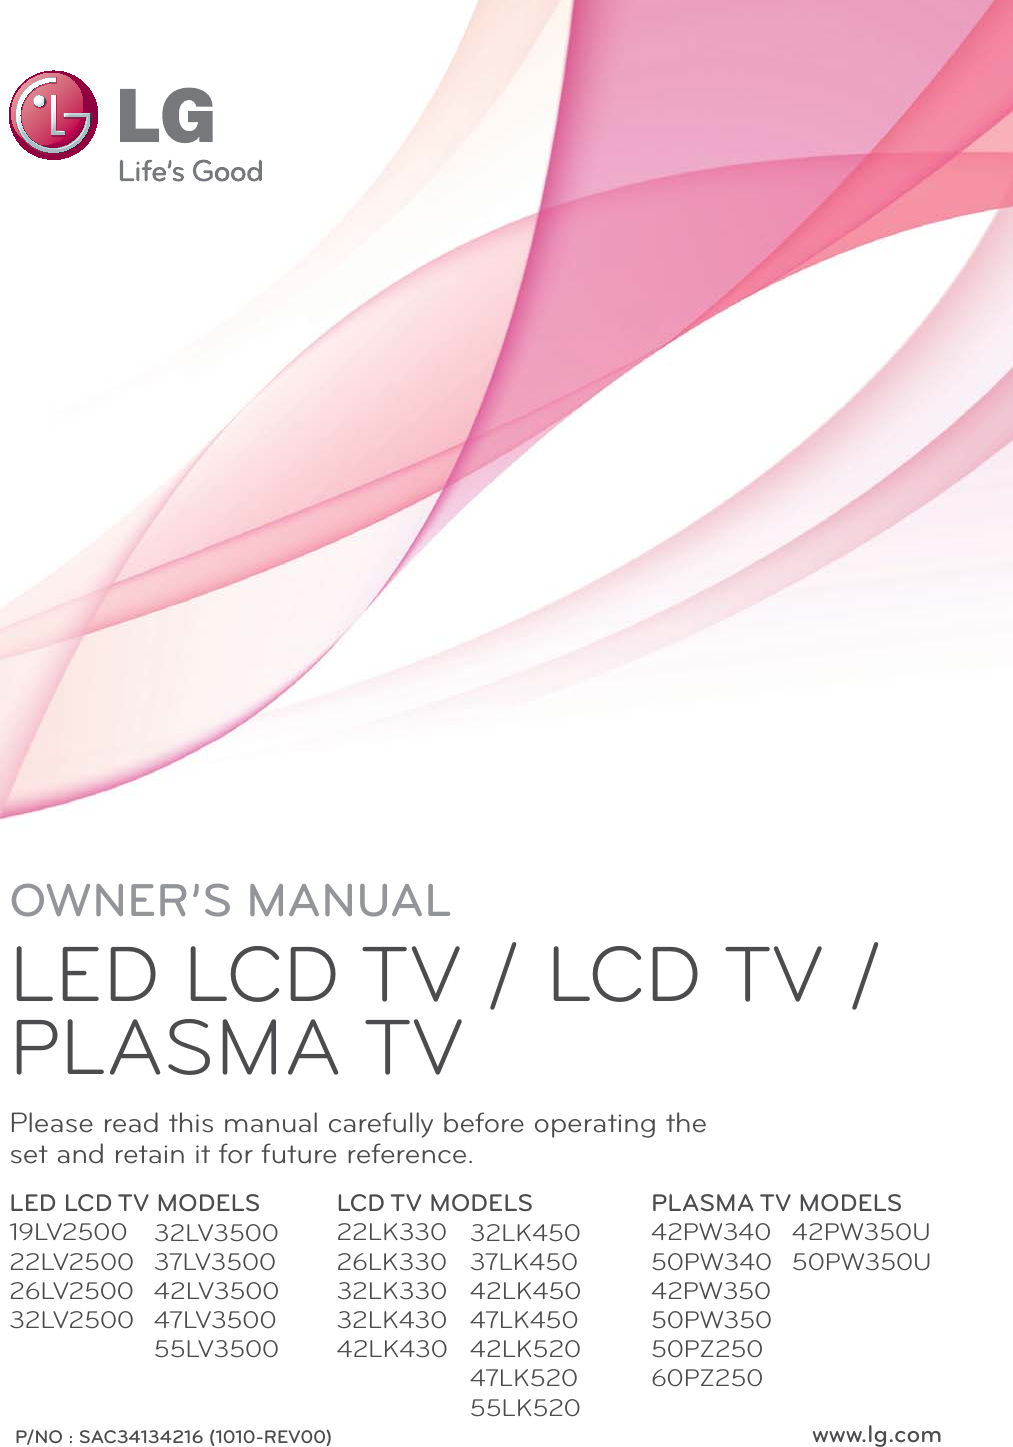 www.lg.comP/NO : SAC34134216 (1010-REV00)OWNER’S MANUALLED LCD TV / LCD TV / PLASMA TVPlease read this manual carefully before operating the set and retain it for future reference.LED LCD TV MODELS19LV250022LV250026LV250032LV2500LCD TV MODELS22LK33026LK33032LK33032LK43042LK430PLASMA TV MODELS42PW34050PW34042PW35050PW35050PZ25060PZ25032LV350037LV350042LV350047LV350055LV350032LK45037LK45042LK45047LK45042LK52047LK52055LK52042PW350U50PW350U